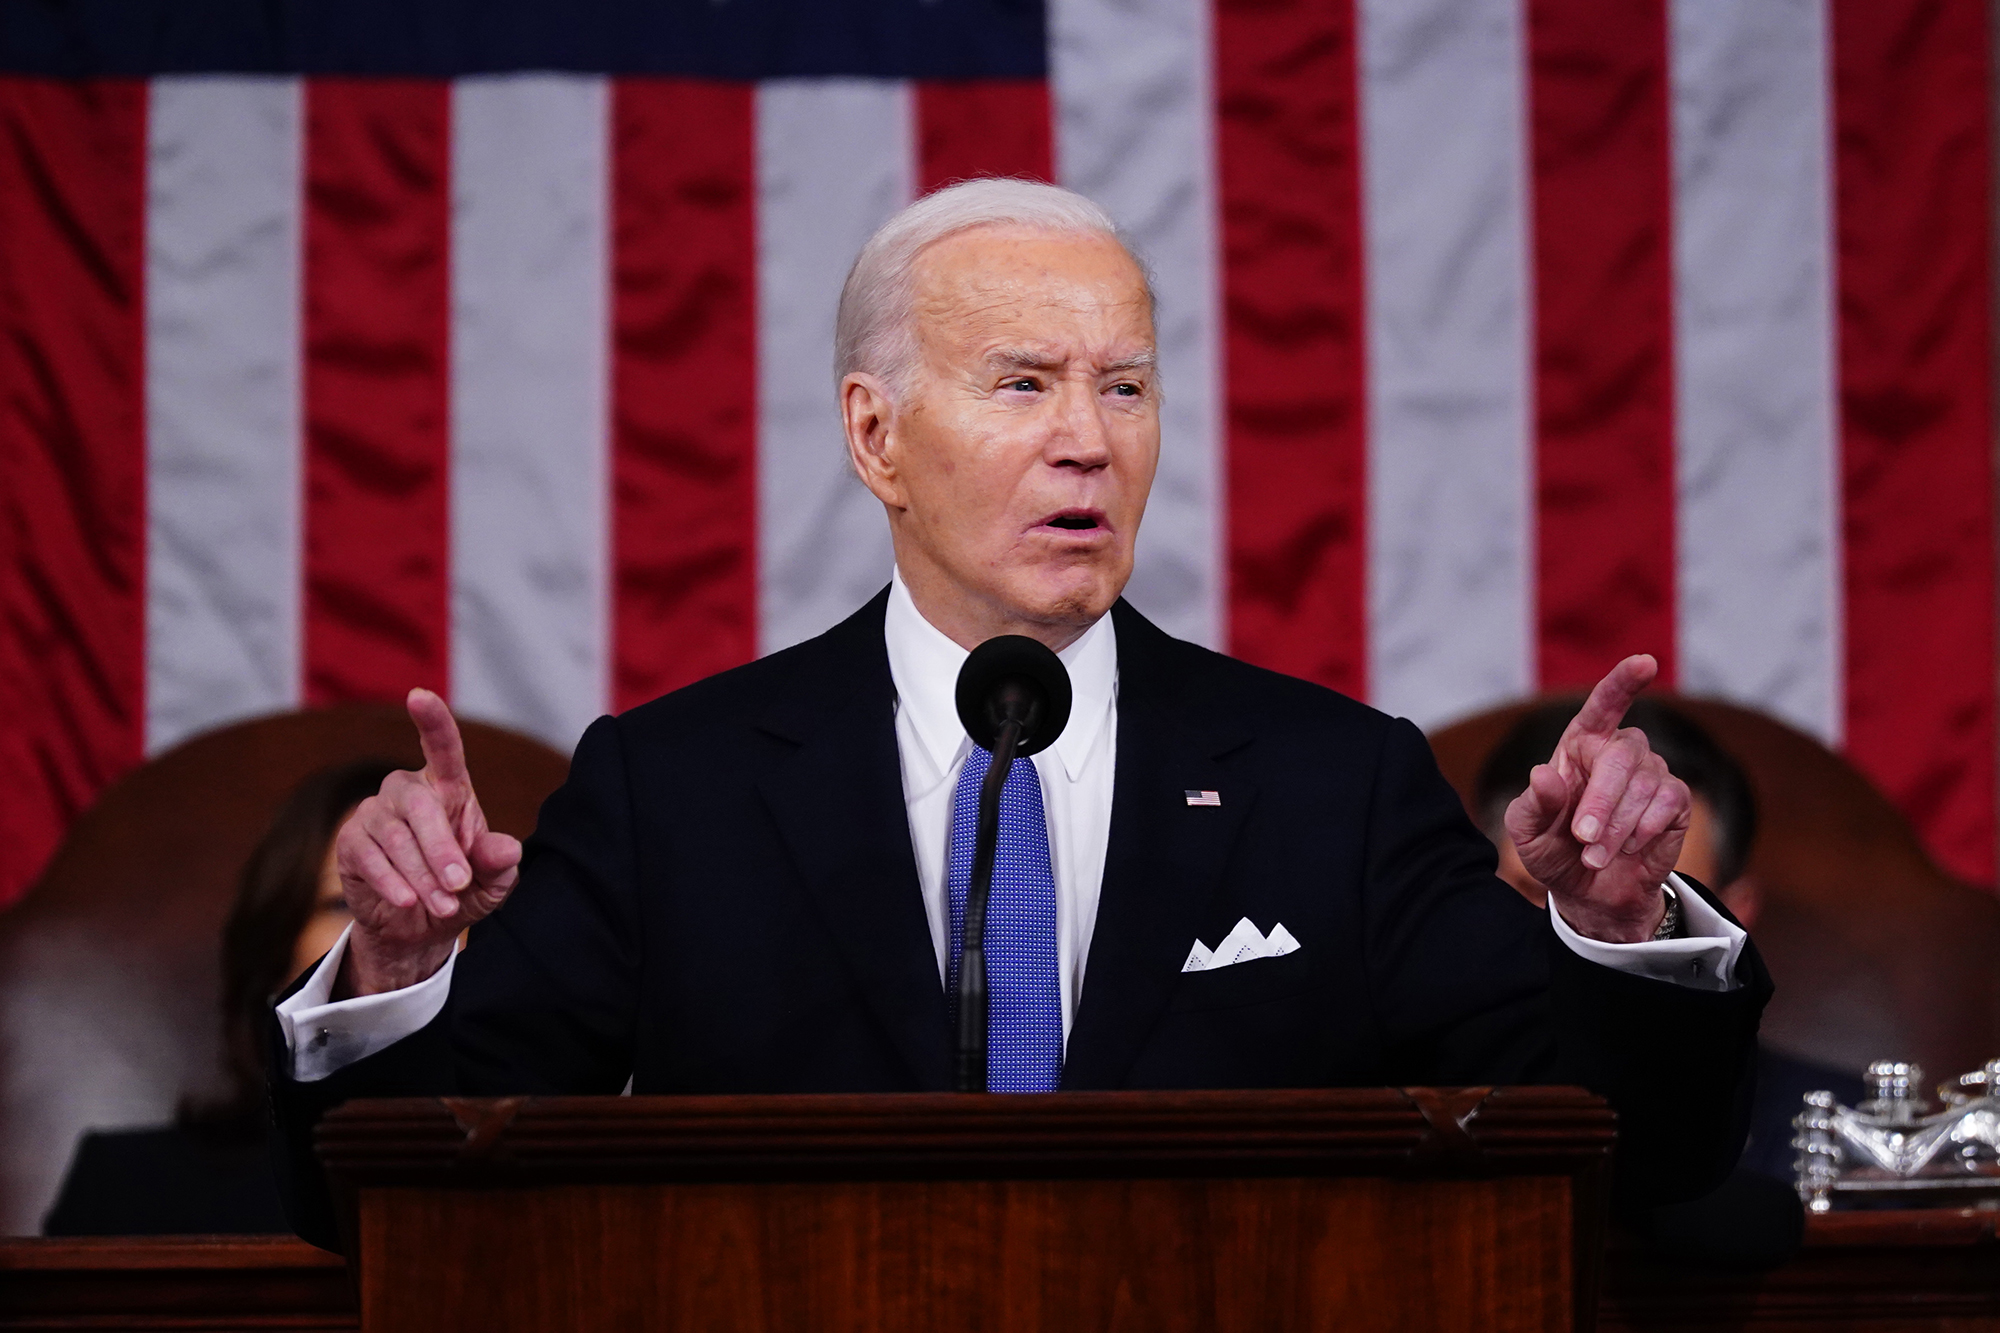 Joe Biden Projects a Vision of Strength and Leadership in State of the Union Address